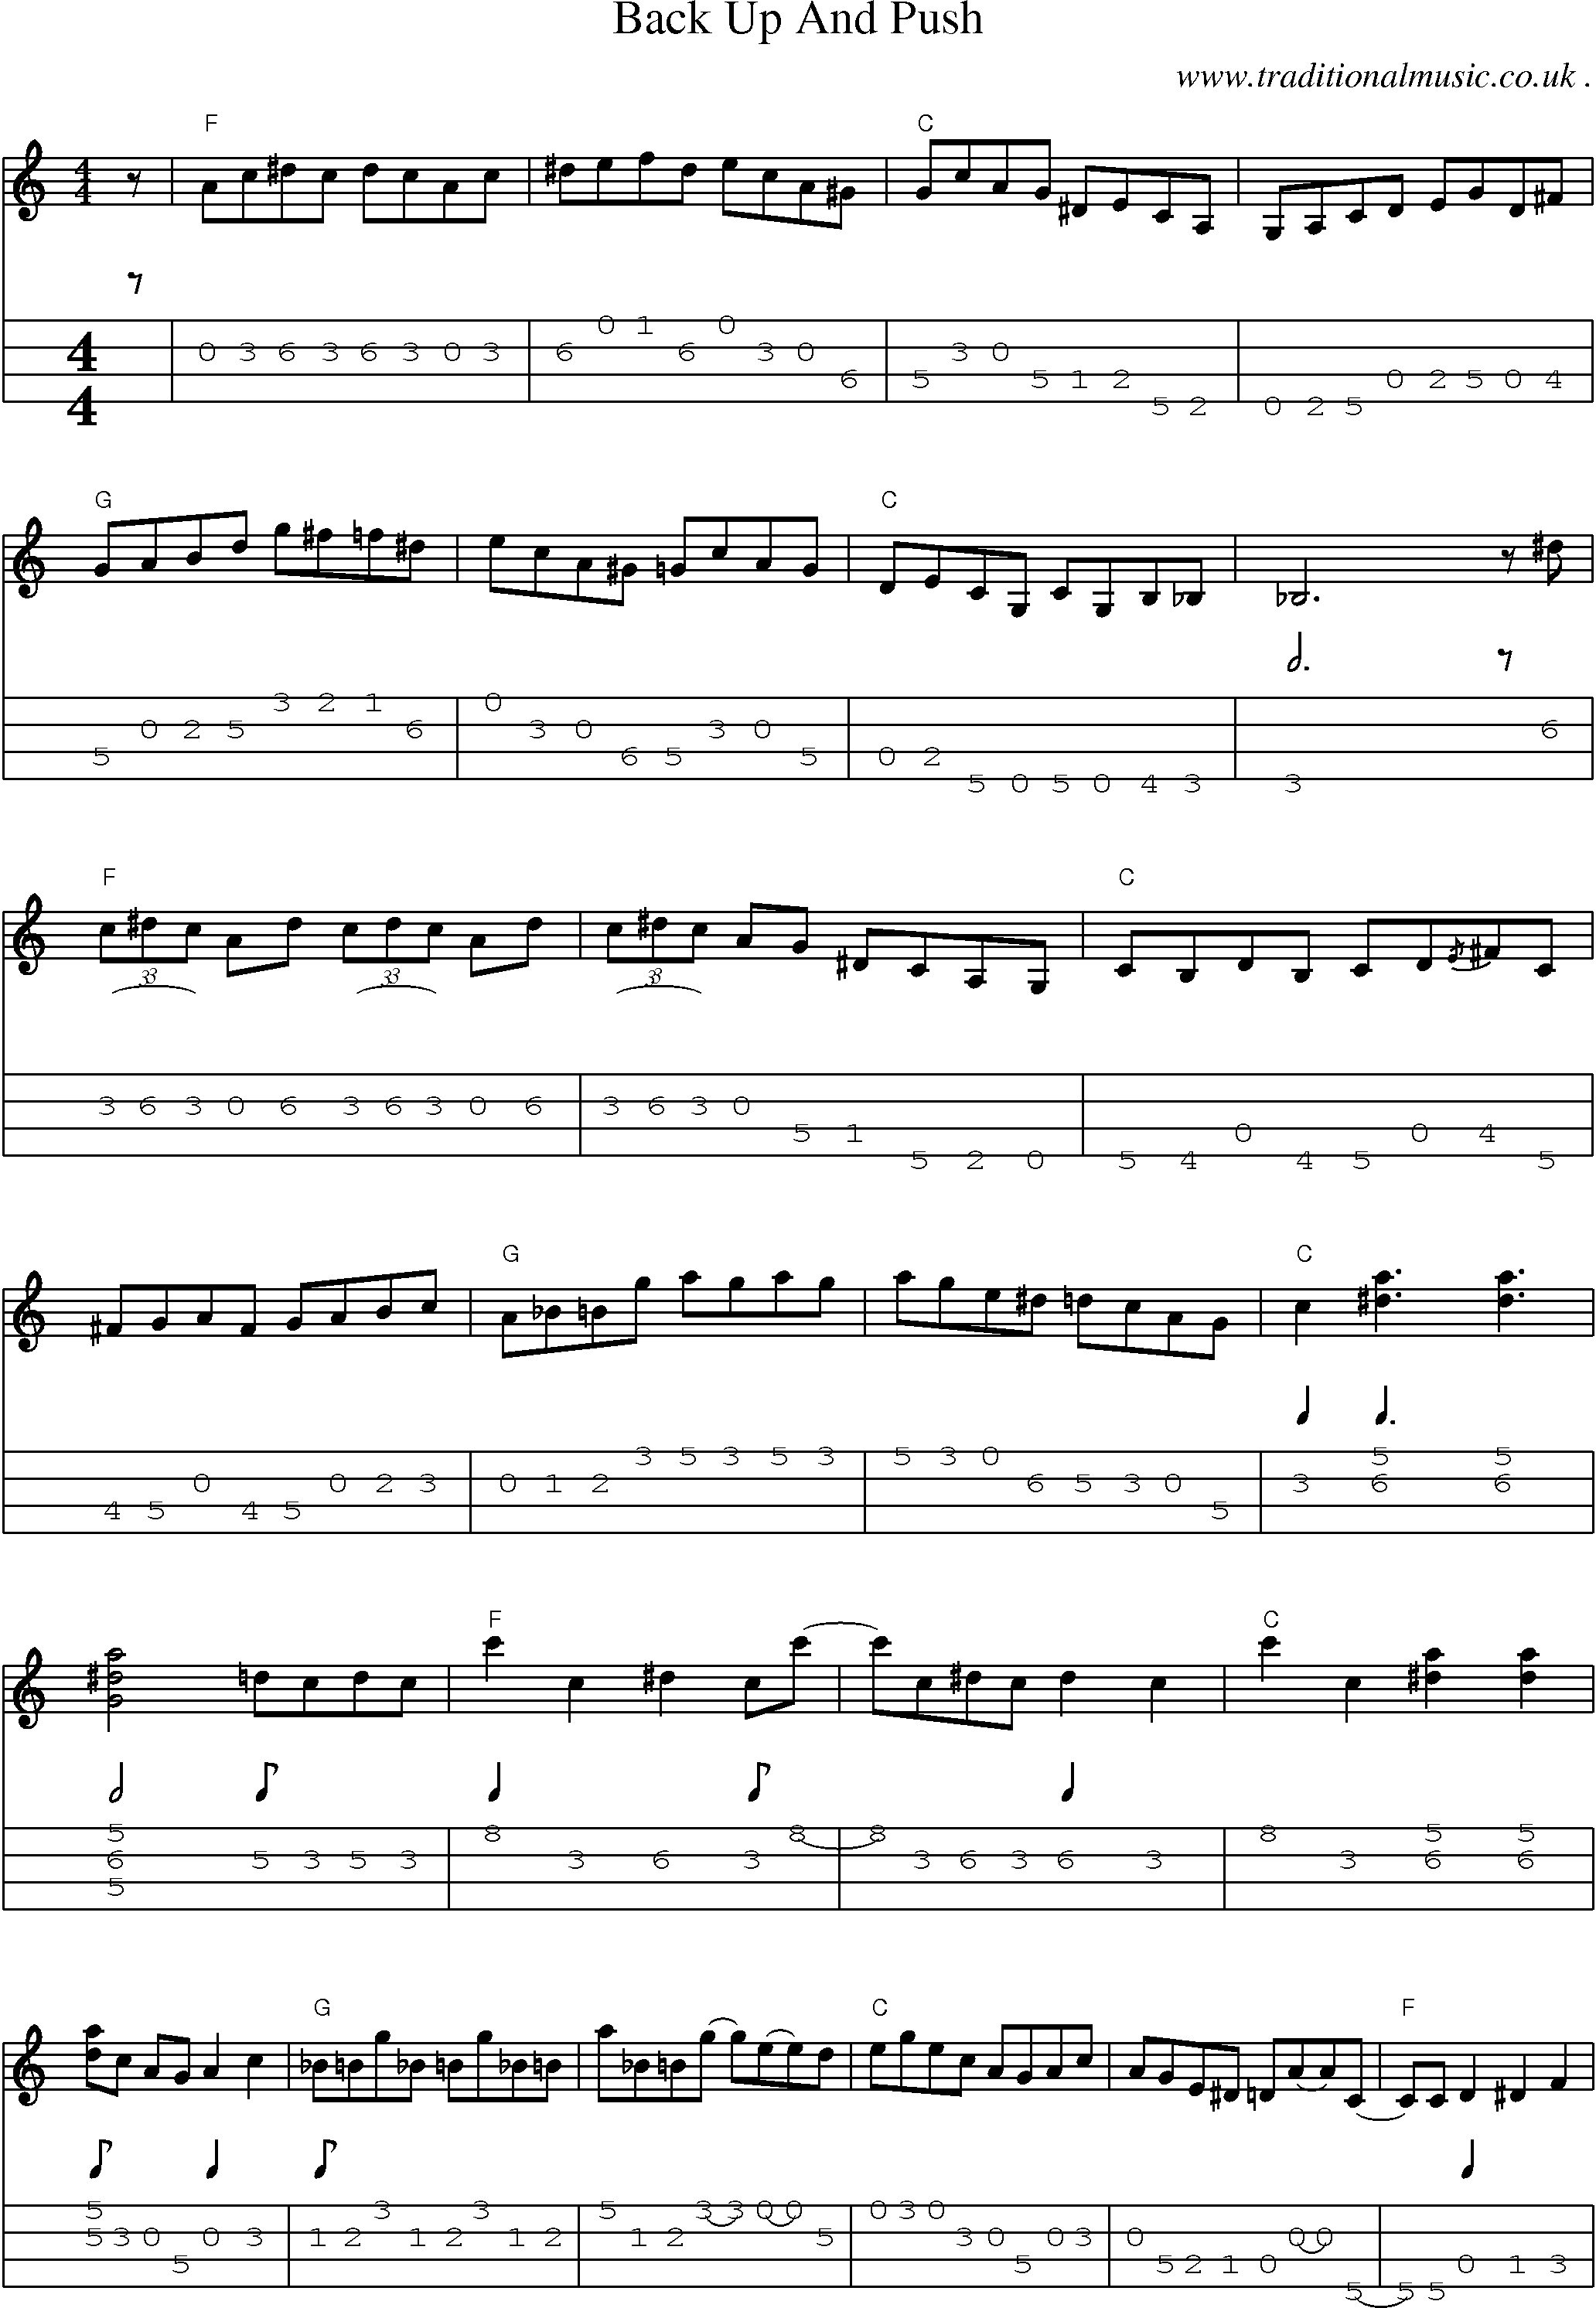 Music Score and Mandolin Tabs for Back Up And Push